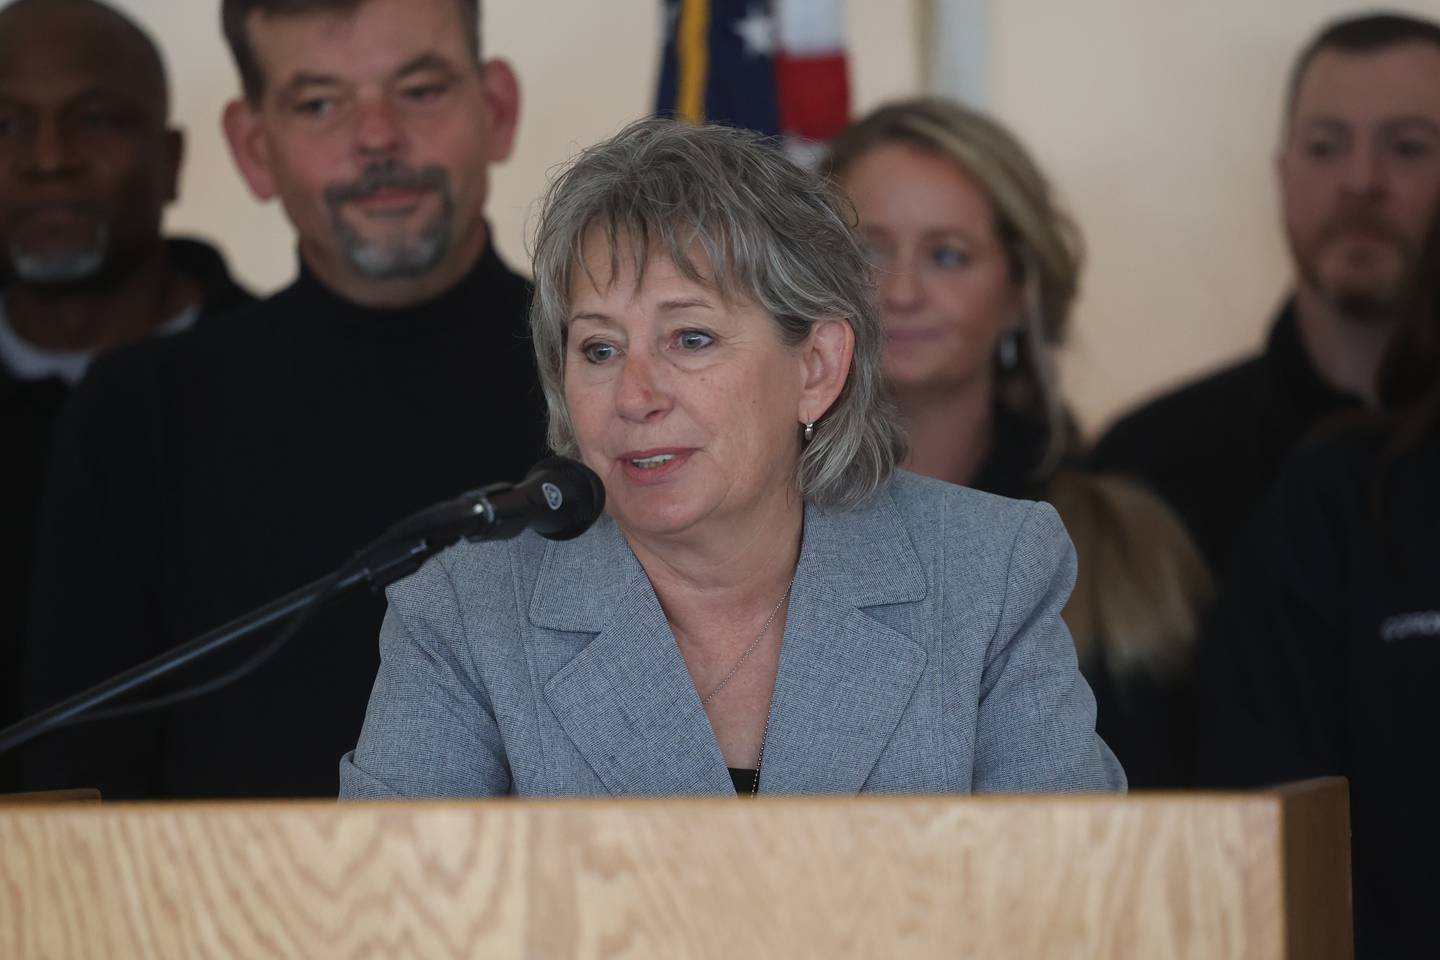 Will County Coroner Laurie Summers RN speaks at the Morgue and Coroner’s Facility Groundbreaking Ceremony on Friday.